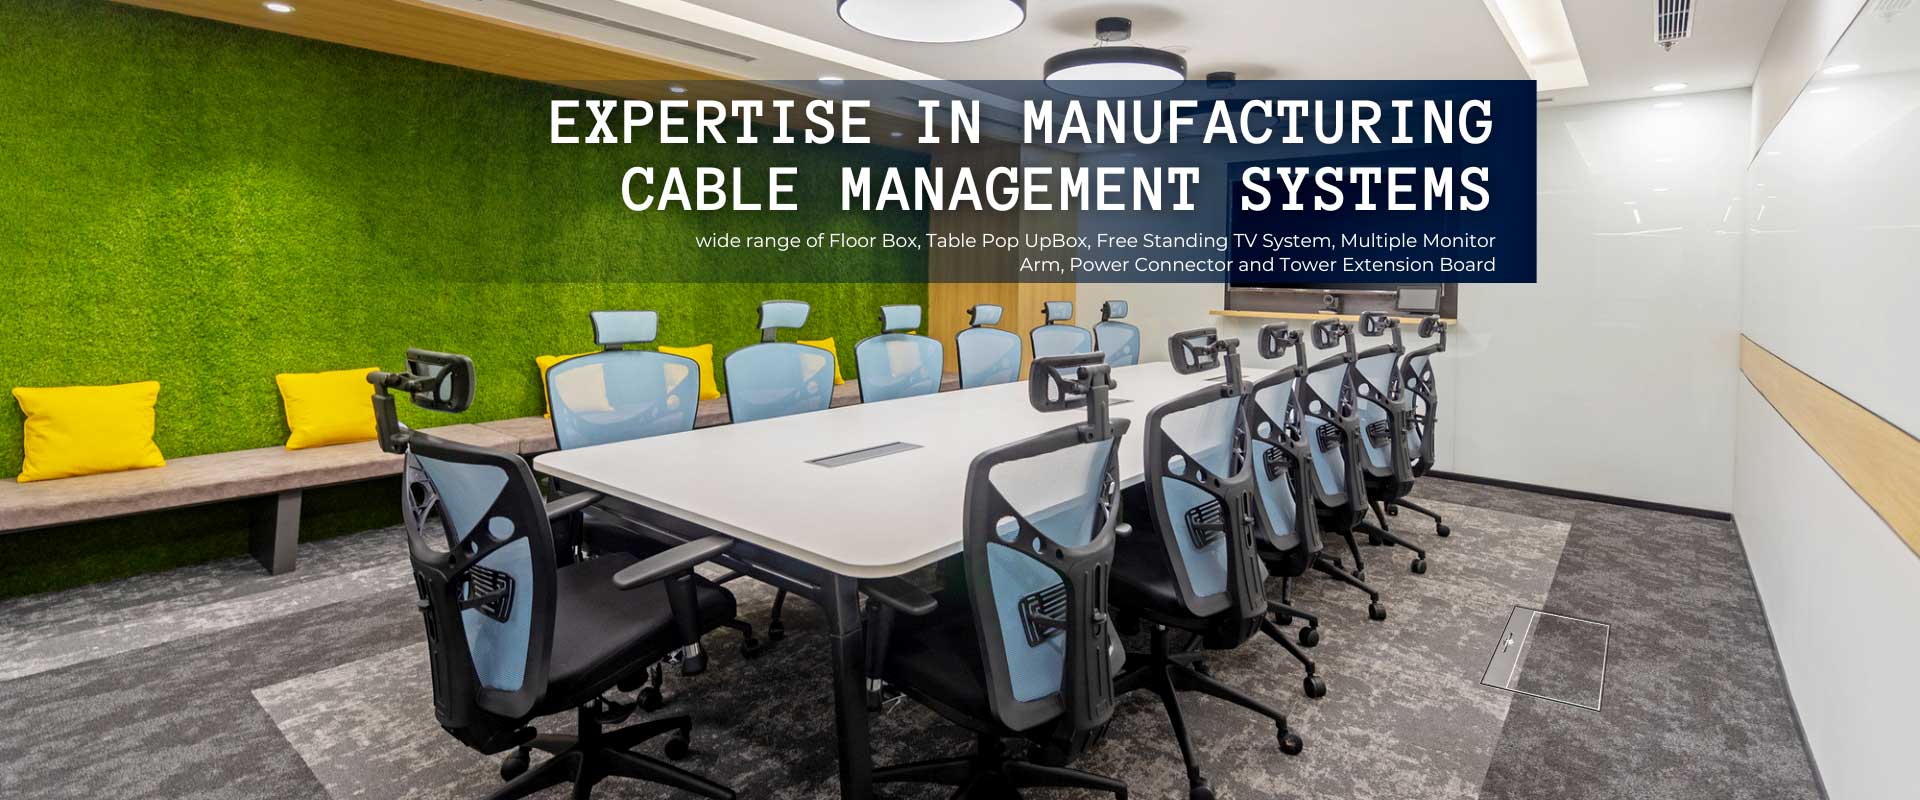 Cable-Management-Systems